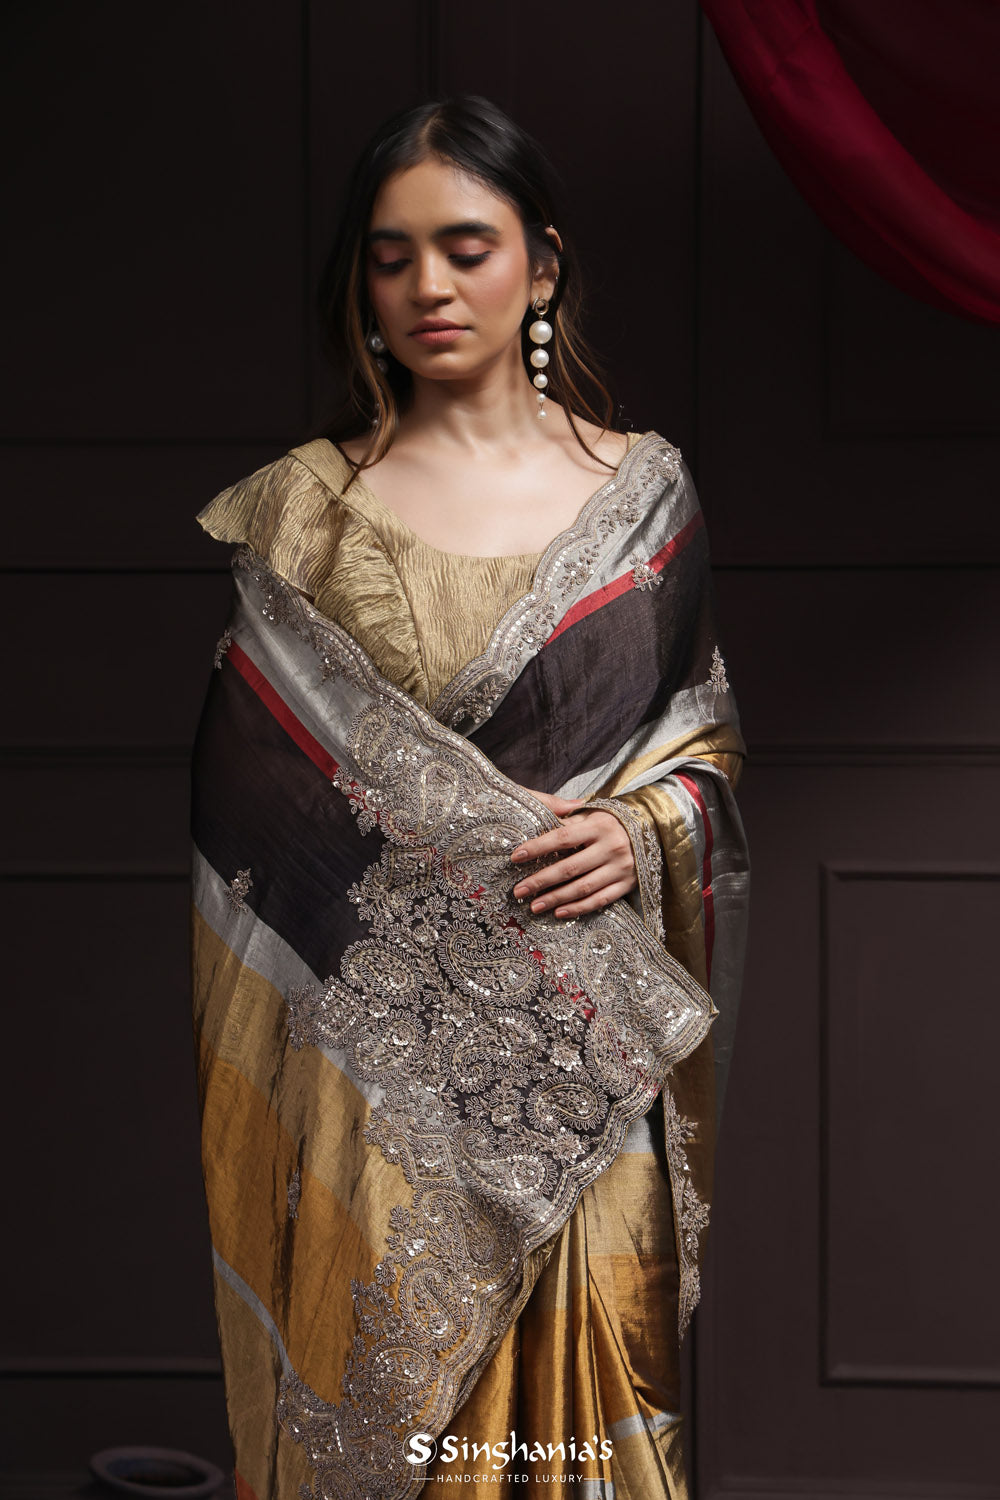 Gold Multi Color Tissue Designer Saree With Floral Embroidery Border